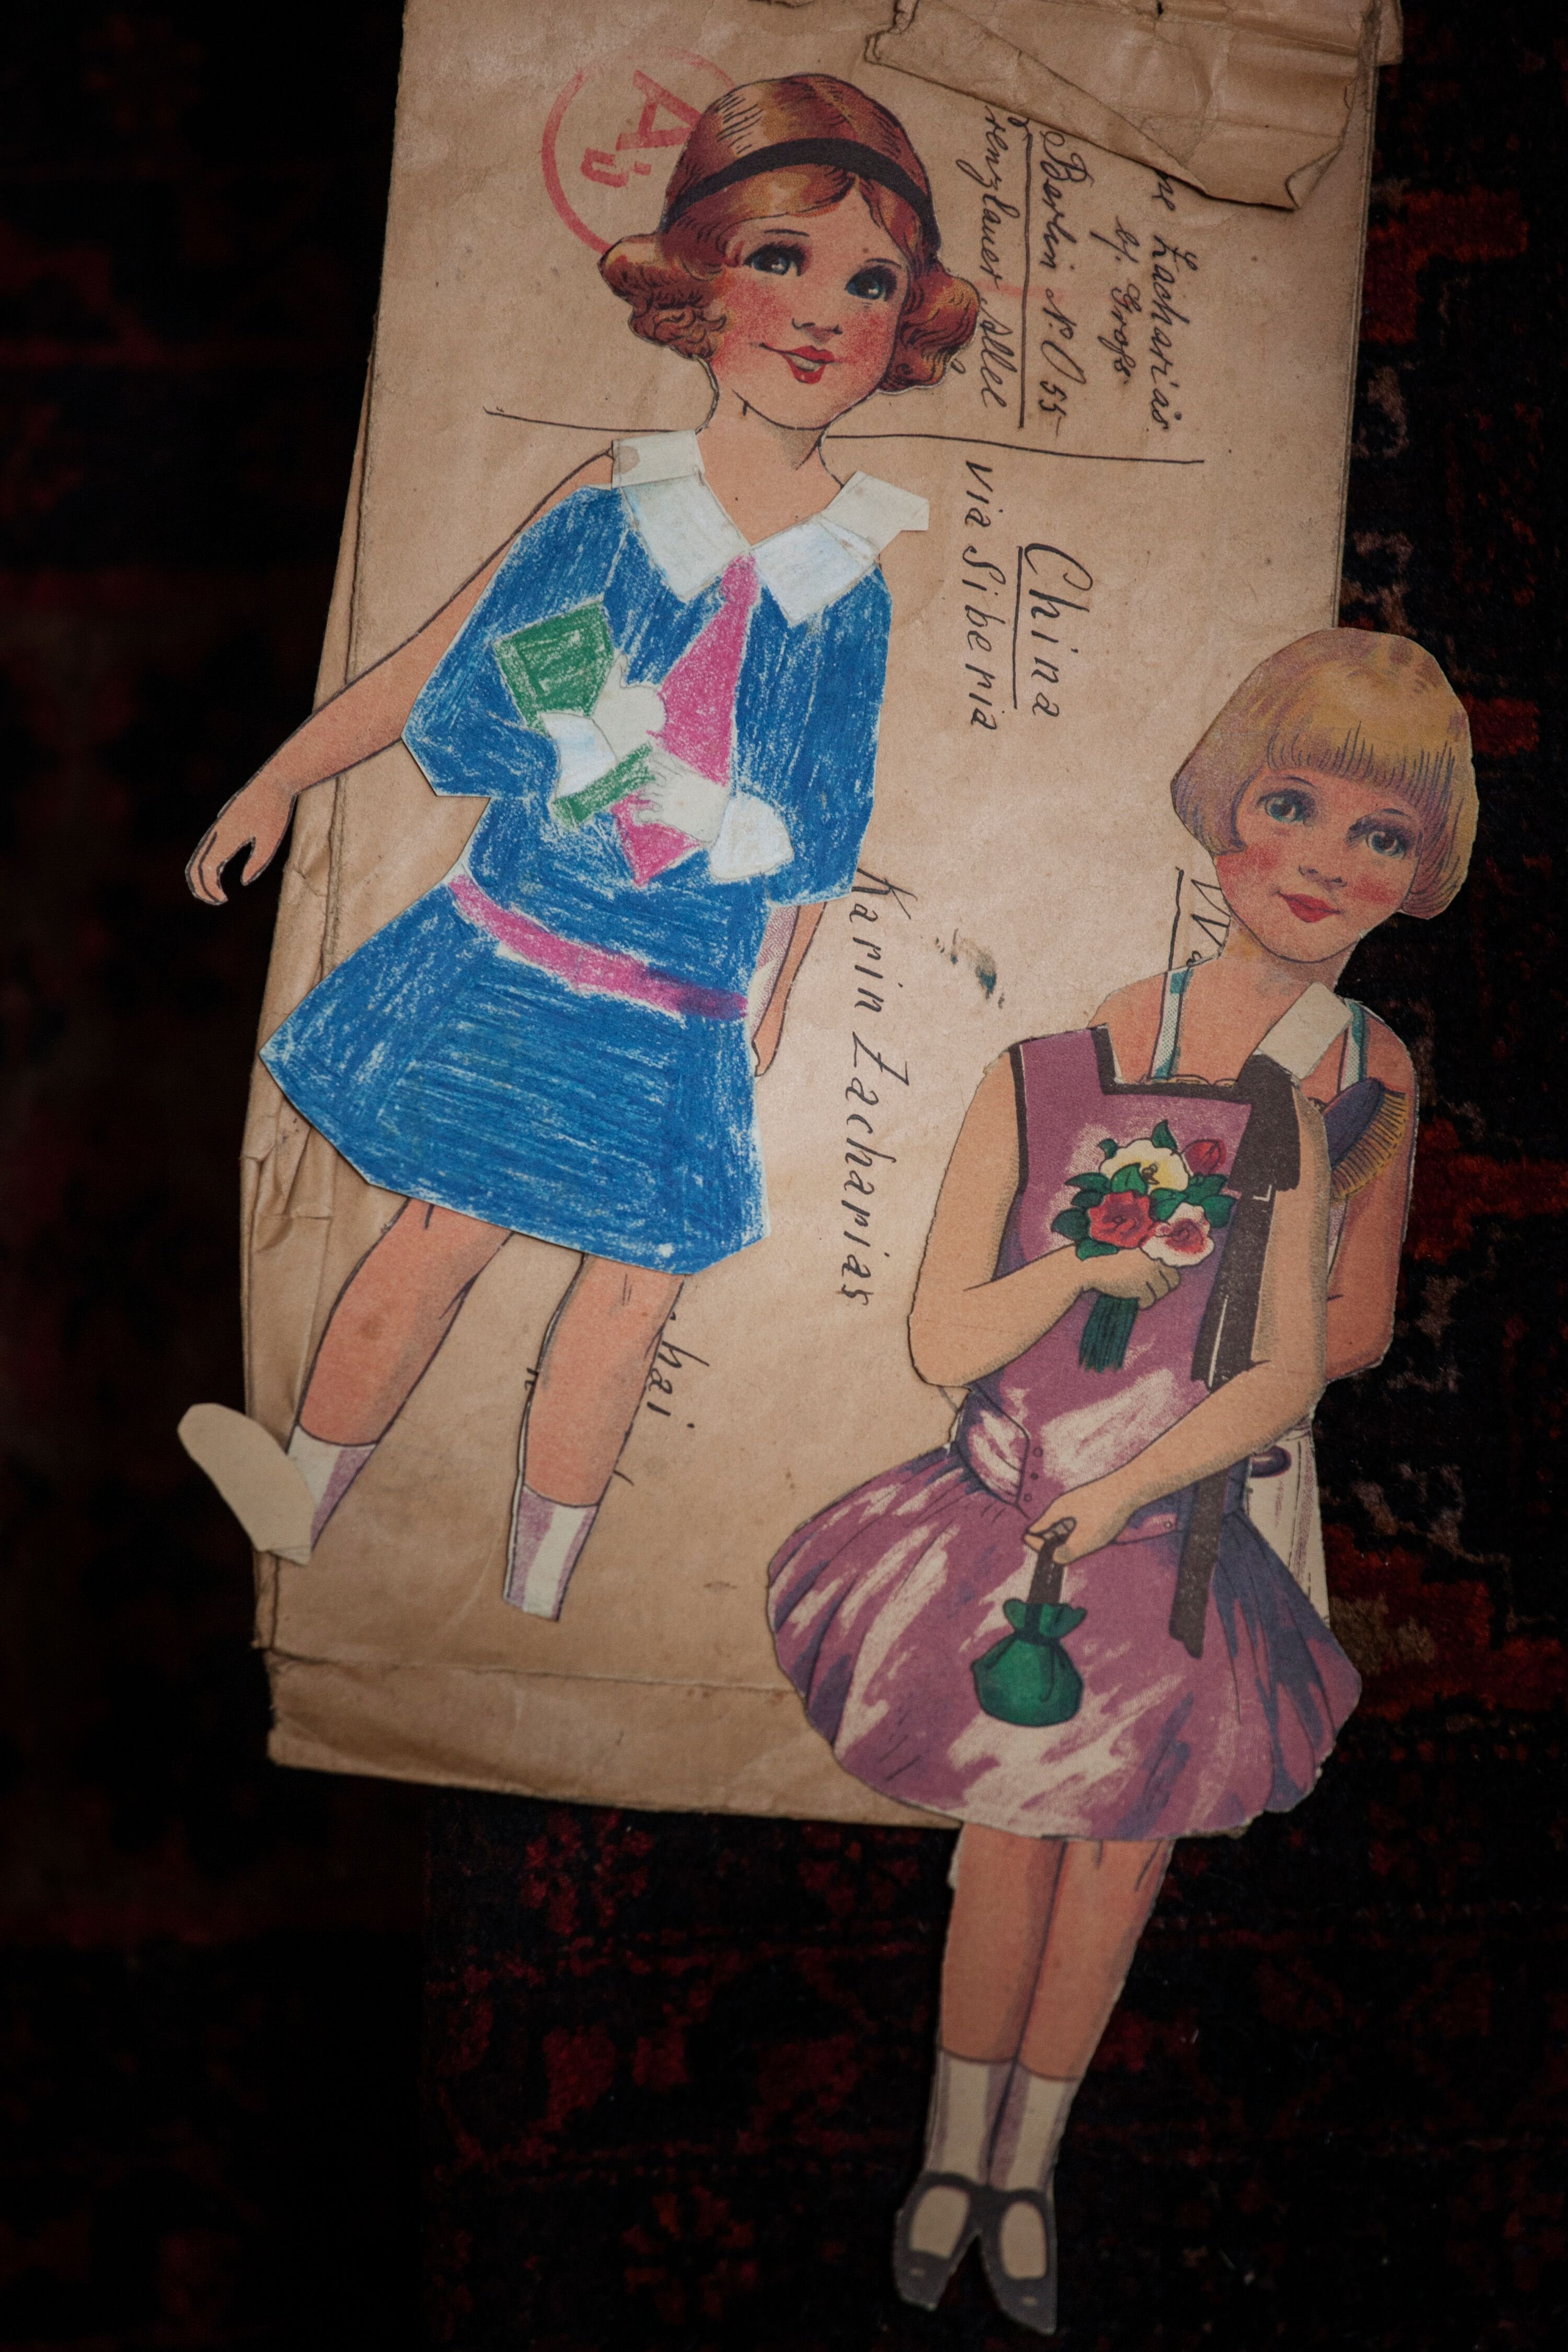 Cut-outs of two paper dolls with colorful dresses, holding books and flowers.